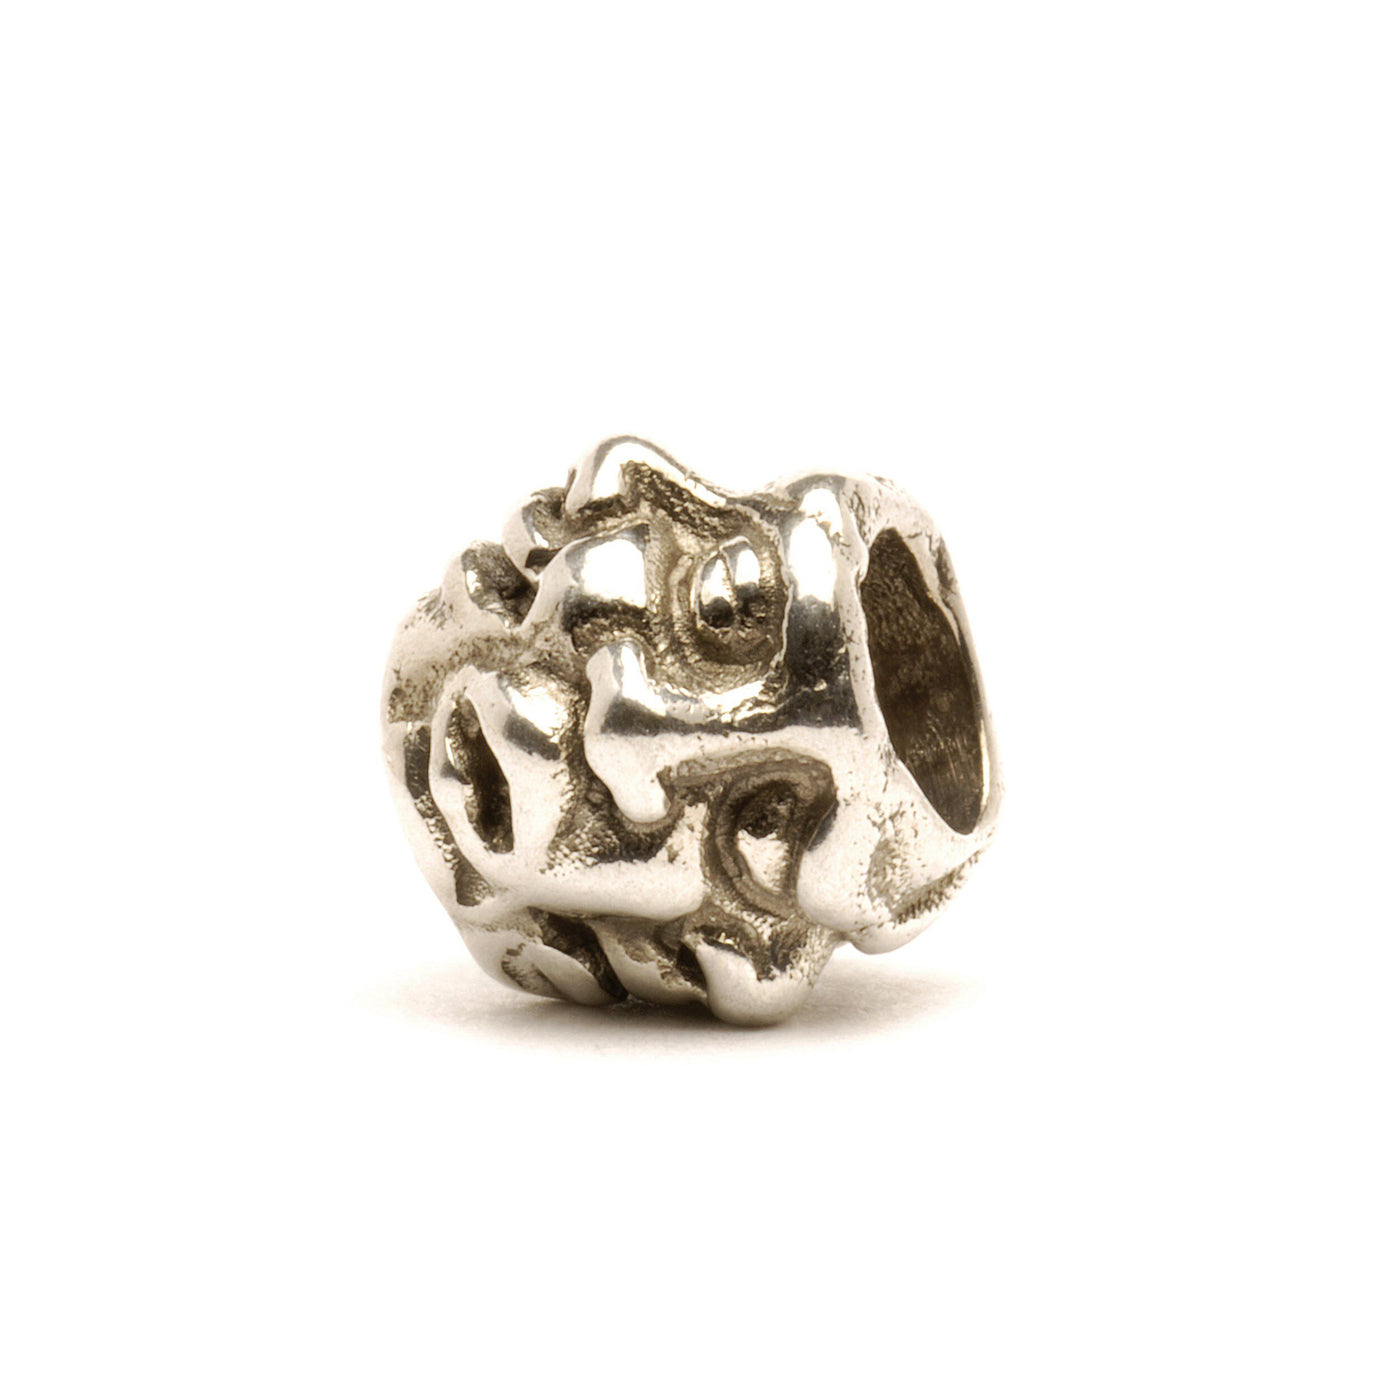 Five Faces - Trollbeads Canada